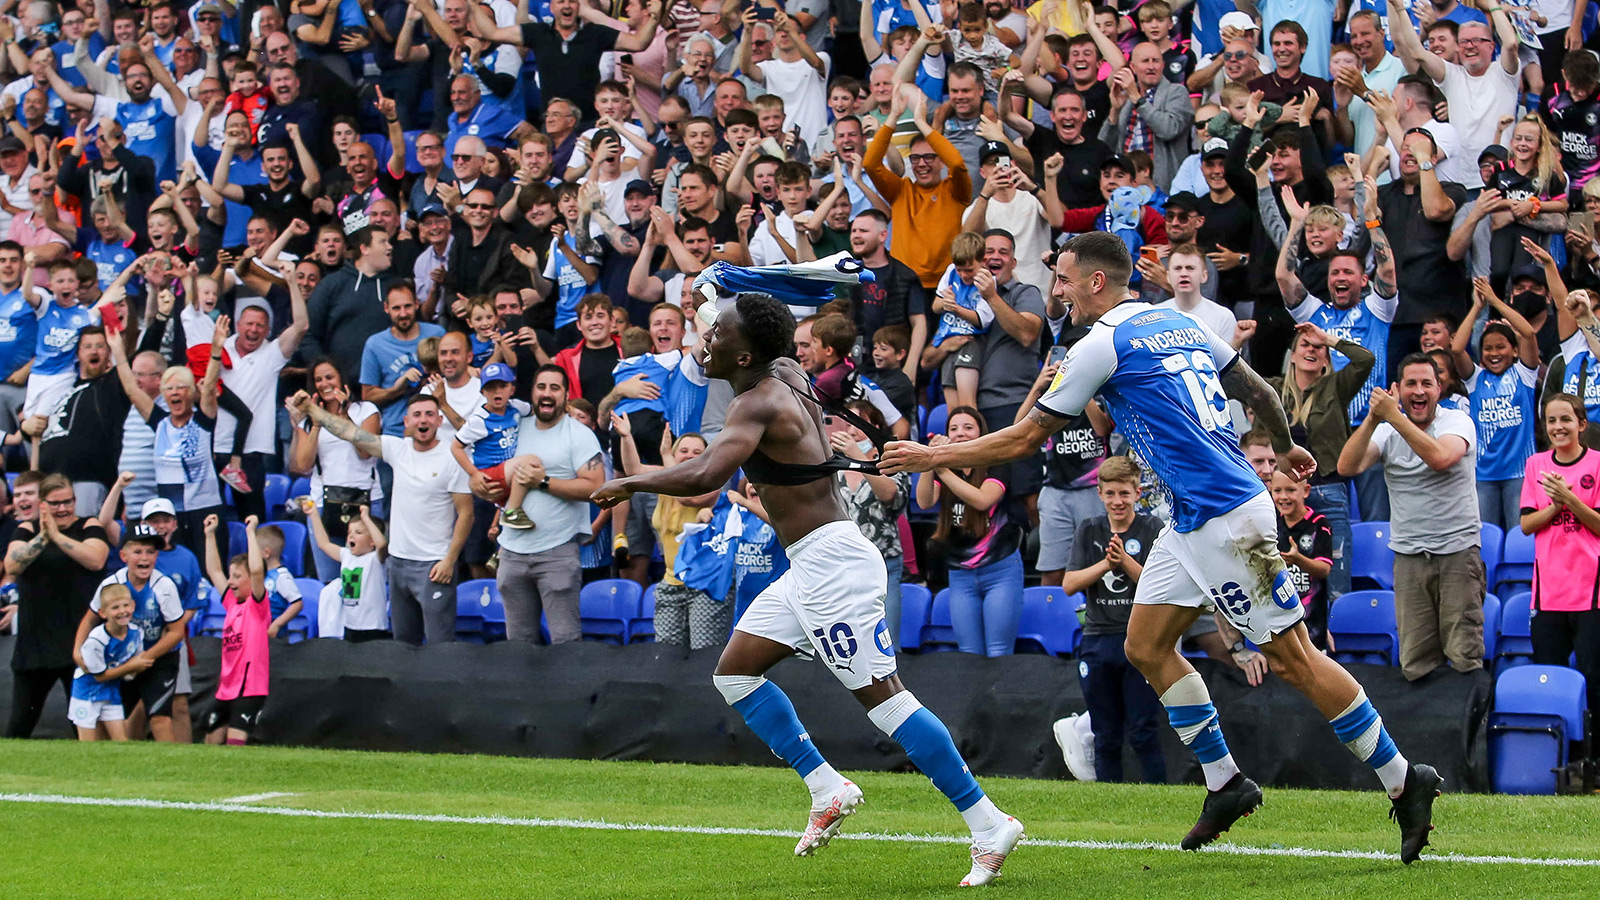 14th August '21 | A dramatic comeback victory secures our first win back in the Championship, made even more special with you Posh fans back in attendance